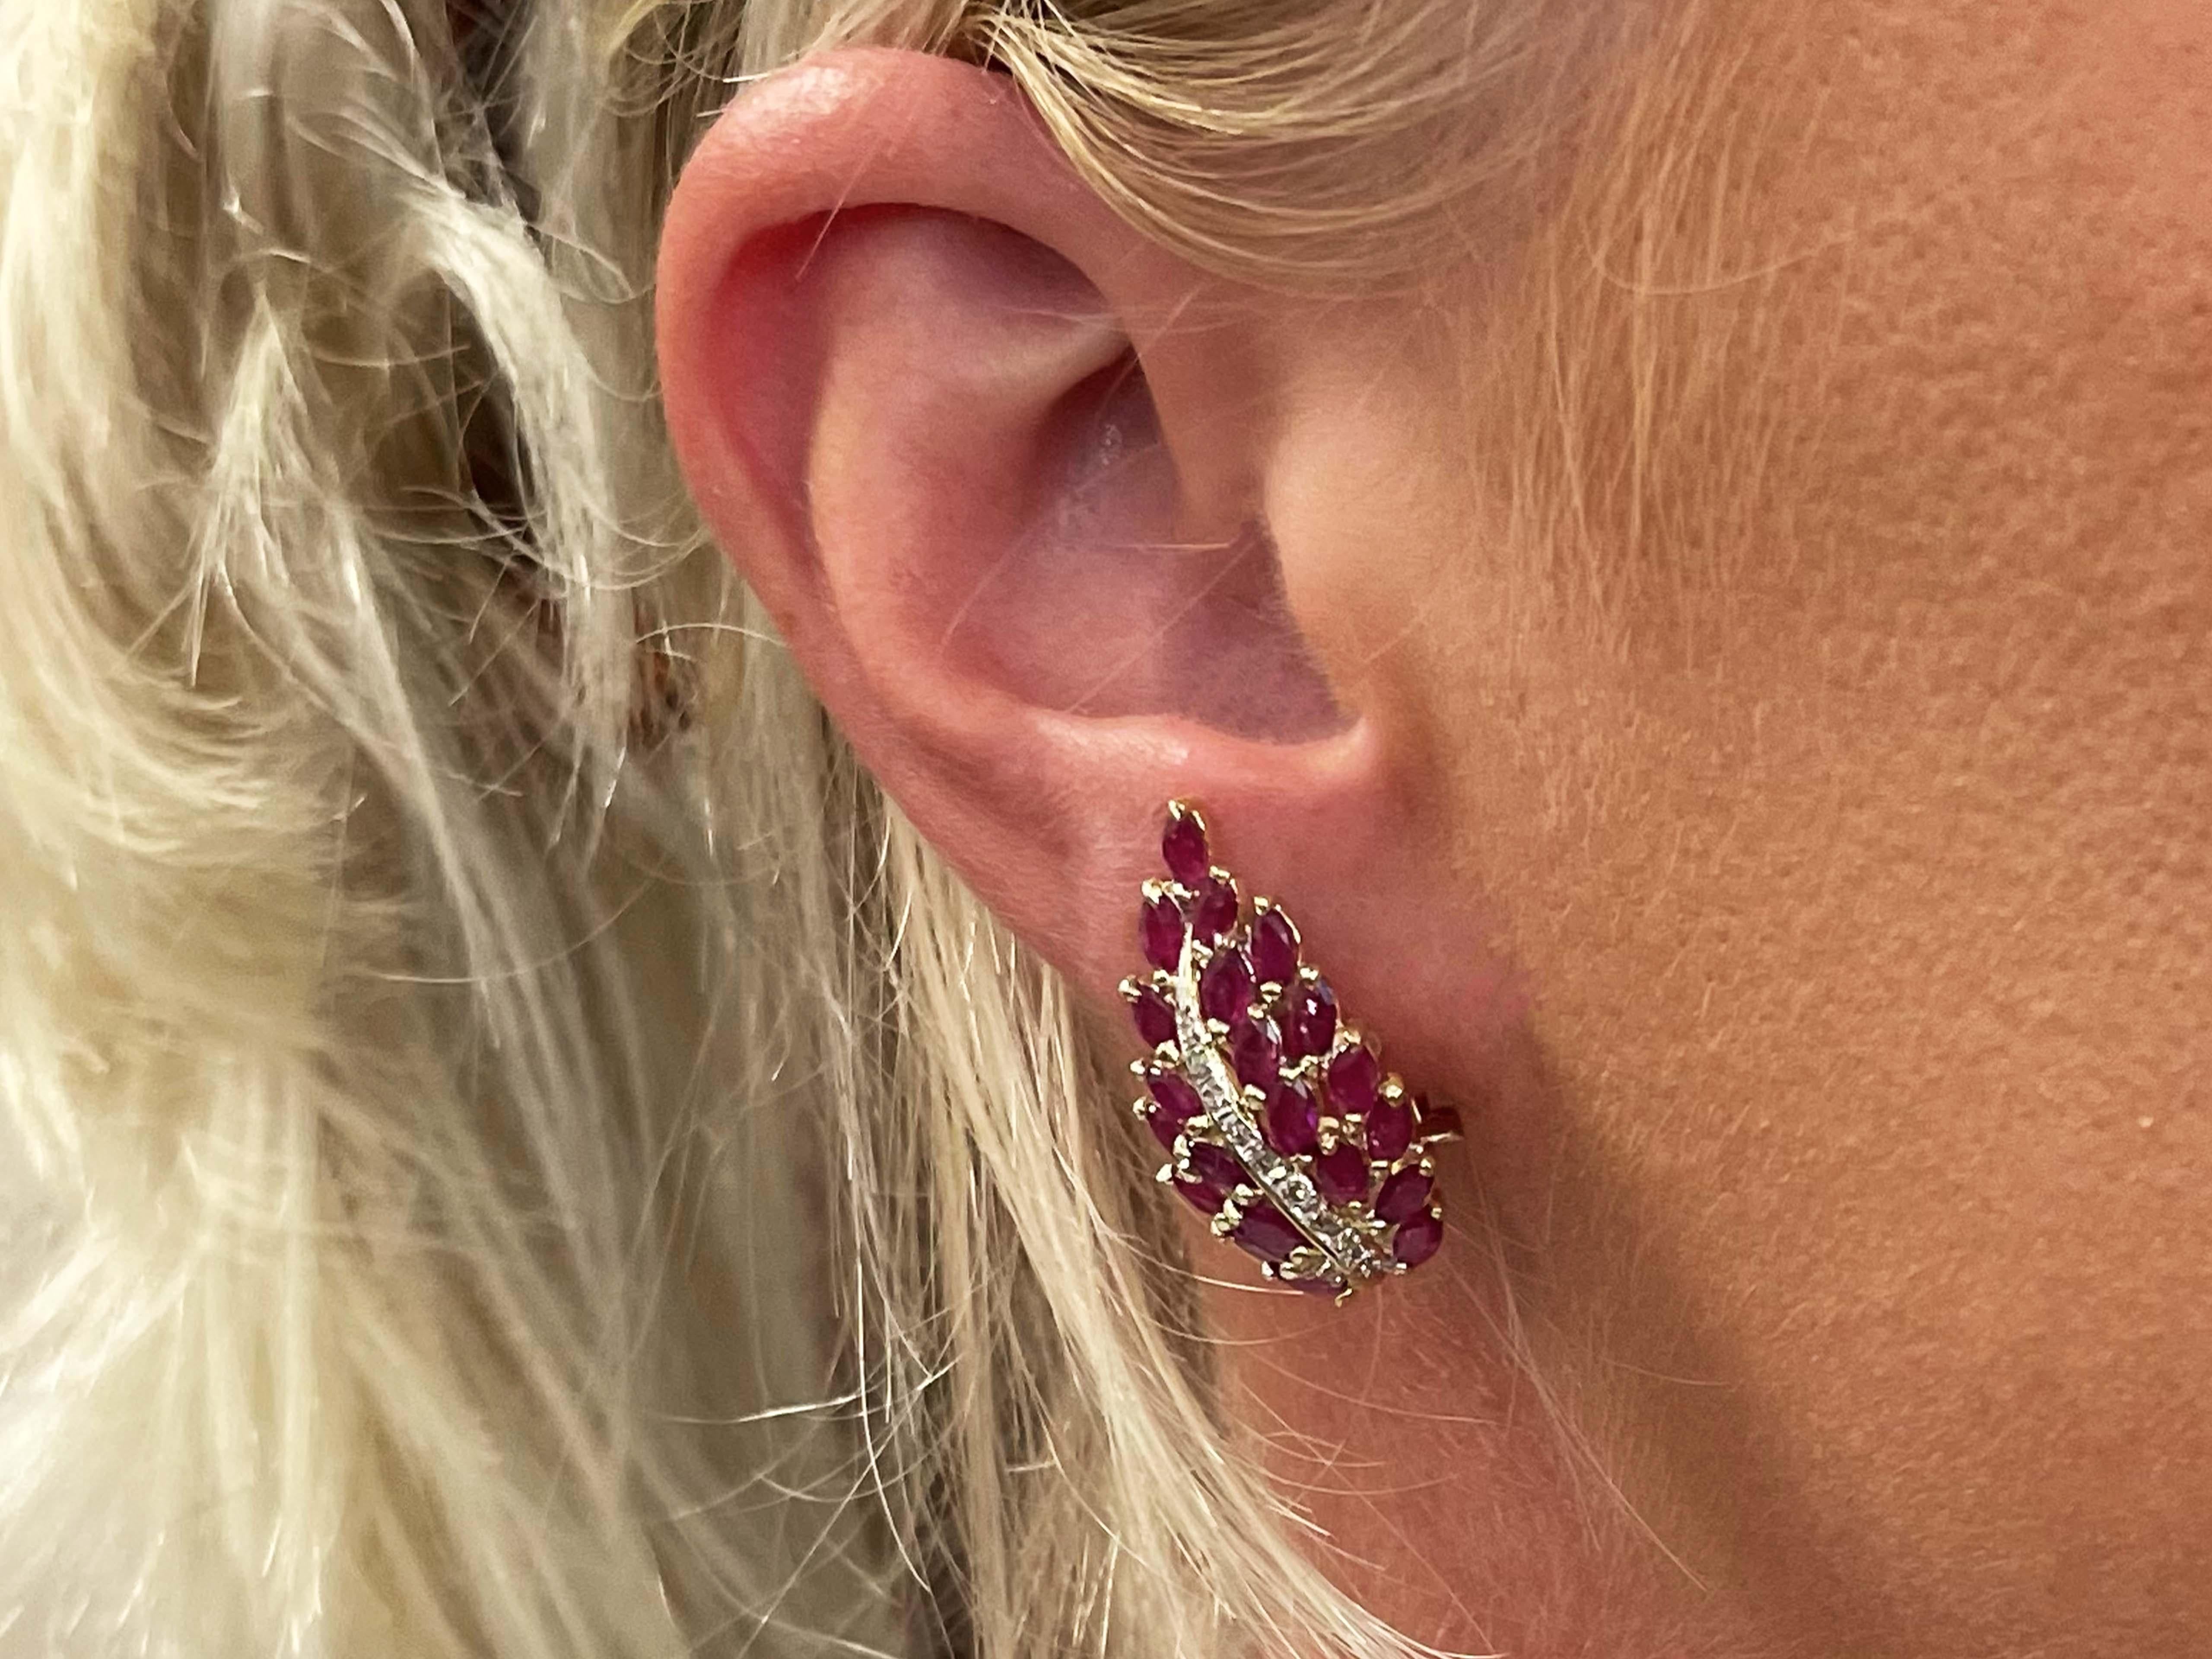 Earrings Specifications:

Metal: 14k Yellow Gold

Earring Diameter: 28 mm x 15 mm

Total Weight: 7.9 Grams

Ruby Setting: Prong

Ruby Total Count: 42

Ruby Carat Weight: ~2.00 carats

​​Diamond Color: H-I
​
​Diamond Clarity: SI
​
​Diamond Count: 20